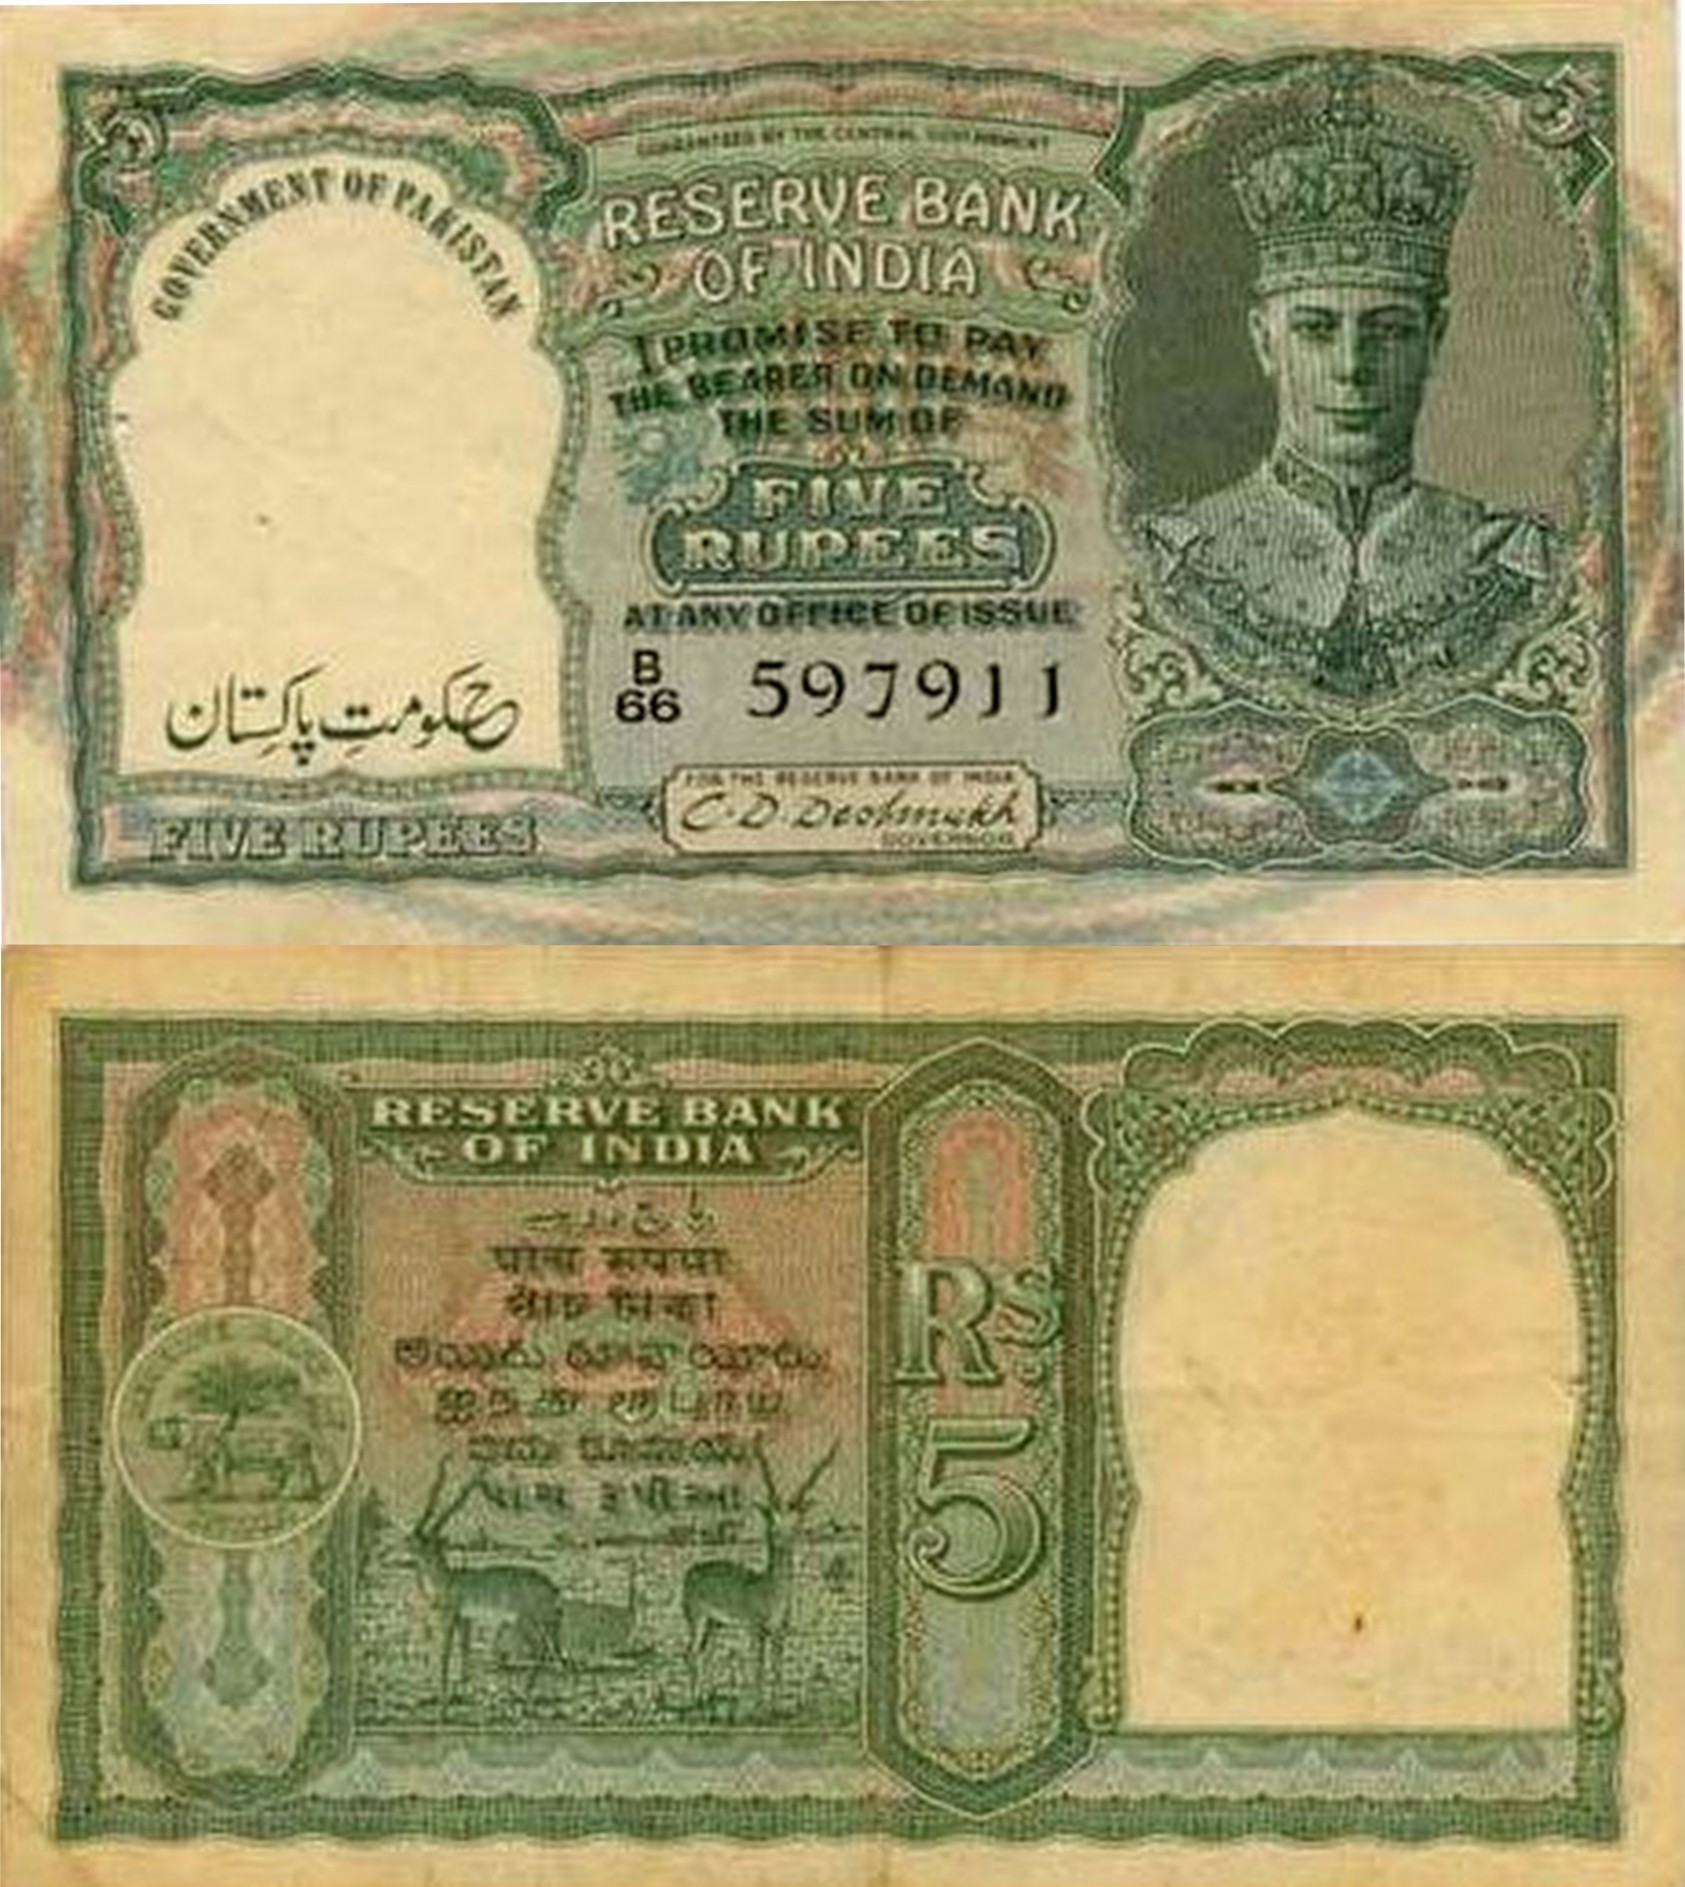 25 Historic And Memorable Currency Notes Of Pakistan - SHUGHAL